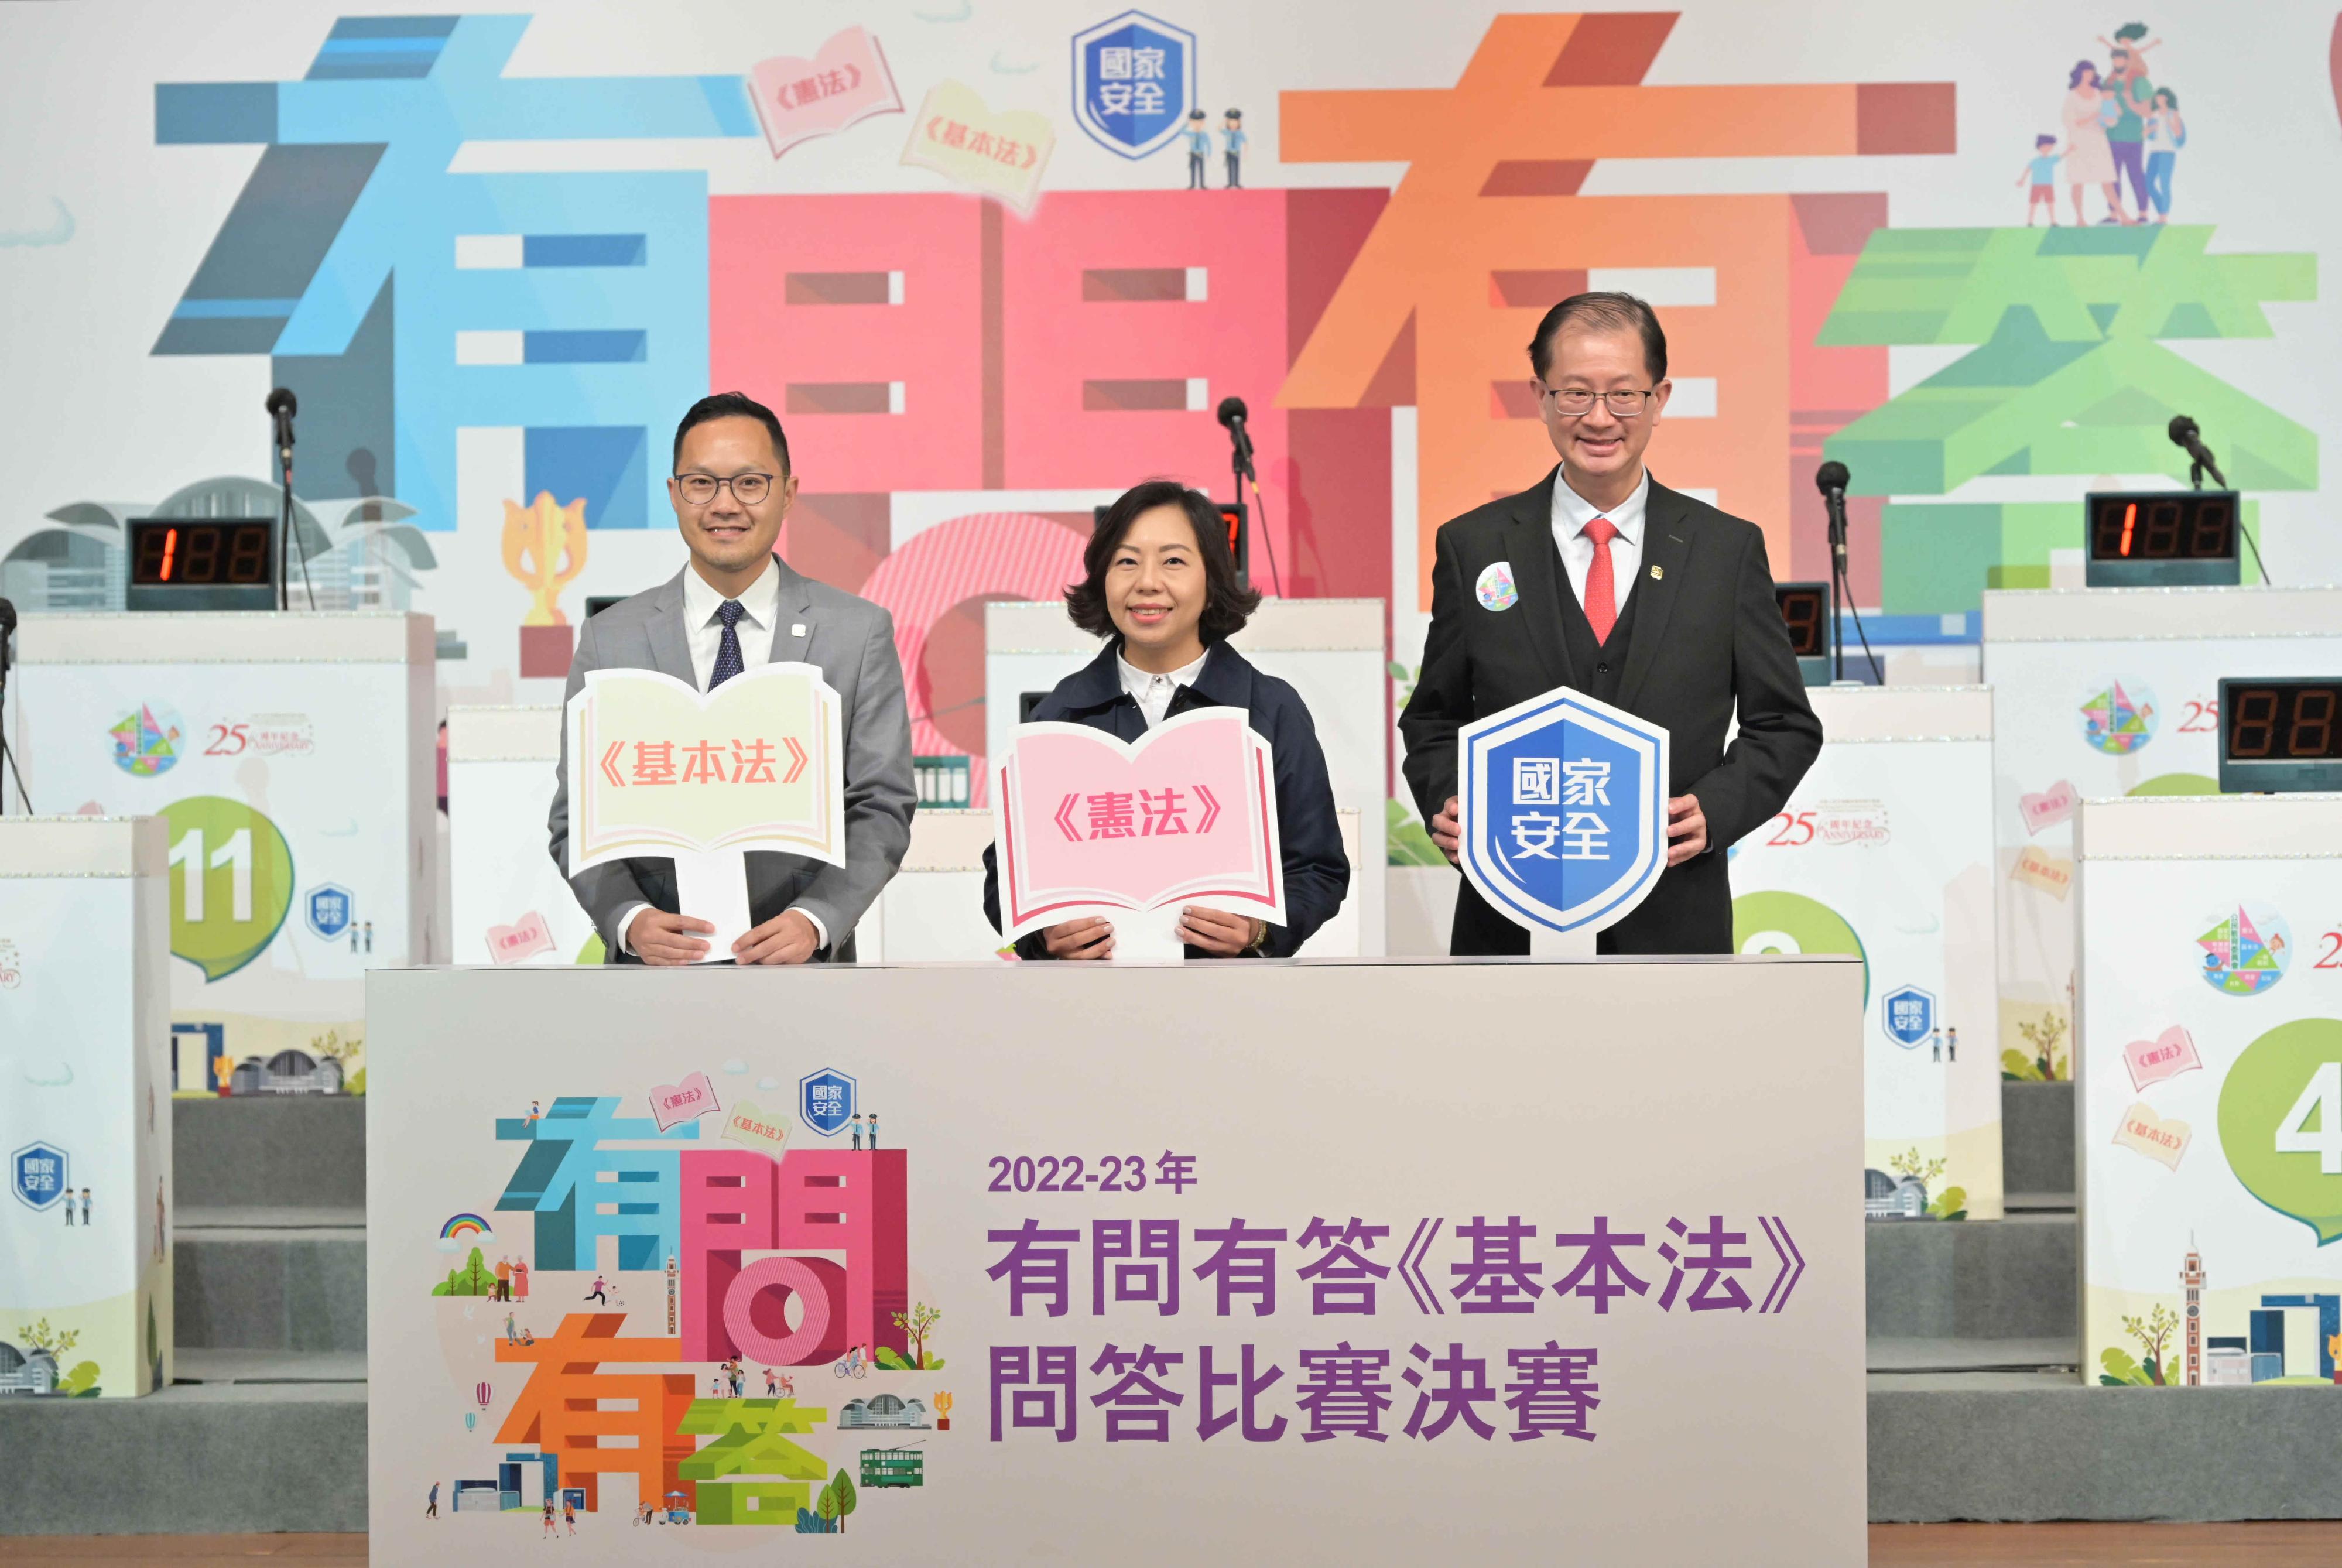 The Secretary for Home and Youth Affairs, Miss Alice Mak (centre); the Chairperson of the Committee on the Promotion of Civic Education (CPCE) and the Convenor of the Working Group on Local Community under the Constitution and Basic Law Promotion Steering Committee, Mr Stanley Choi (left); and the Convenor of the 2022-23 National Education Sub-committee of the CPCE, Mr Henry Tong (right), officiate at the Basic Law Quiz Competition Final and Prize Presentation Ceremony today (March 11).
